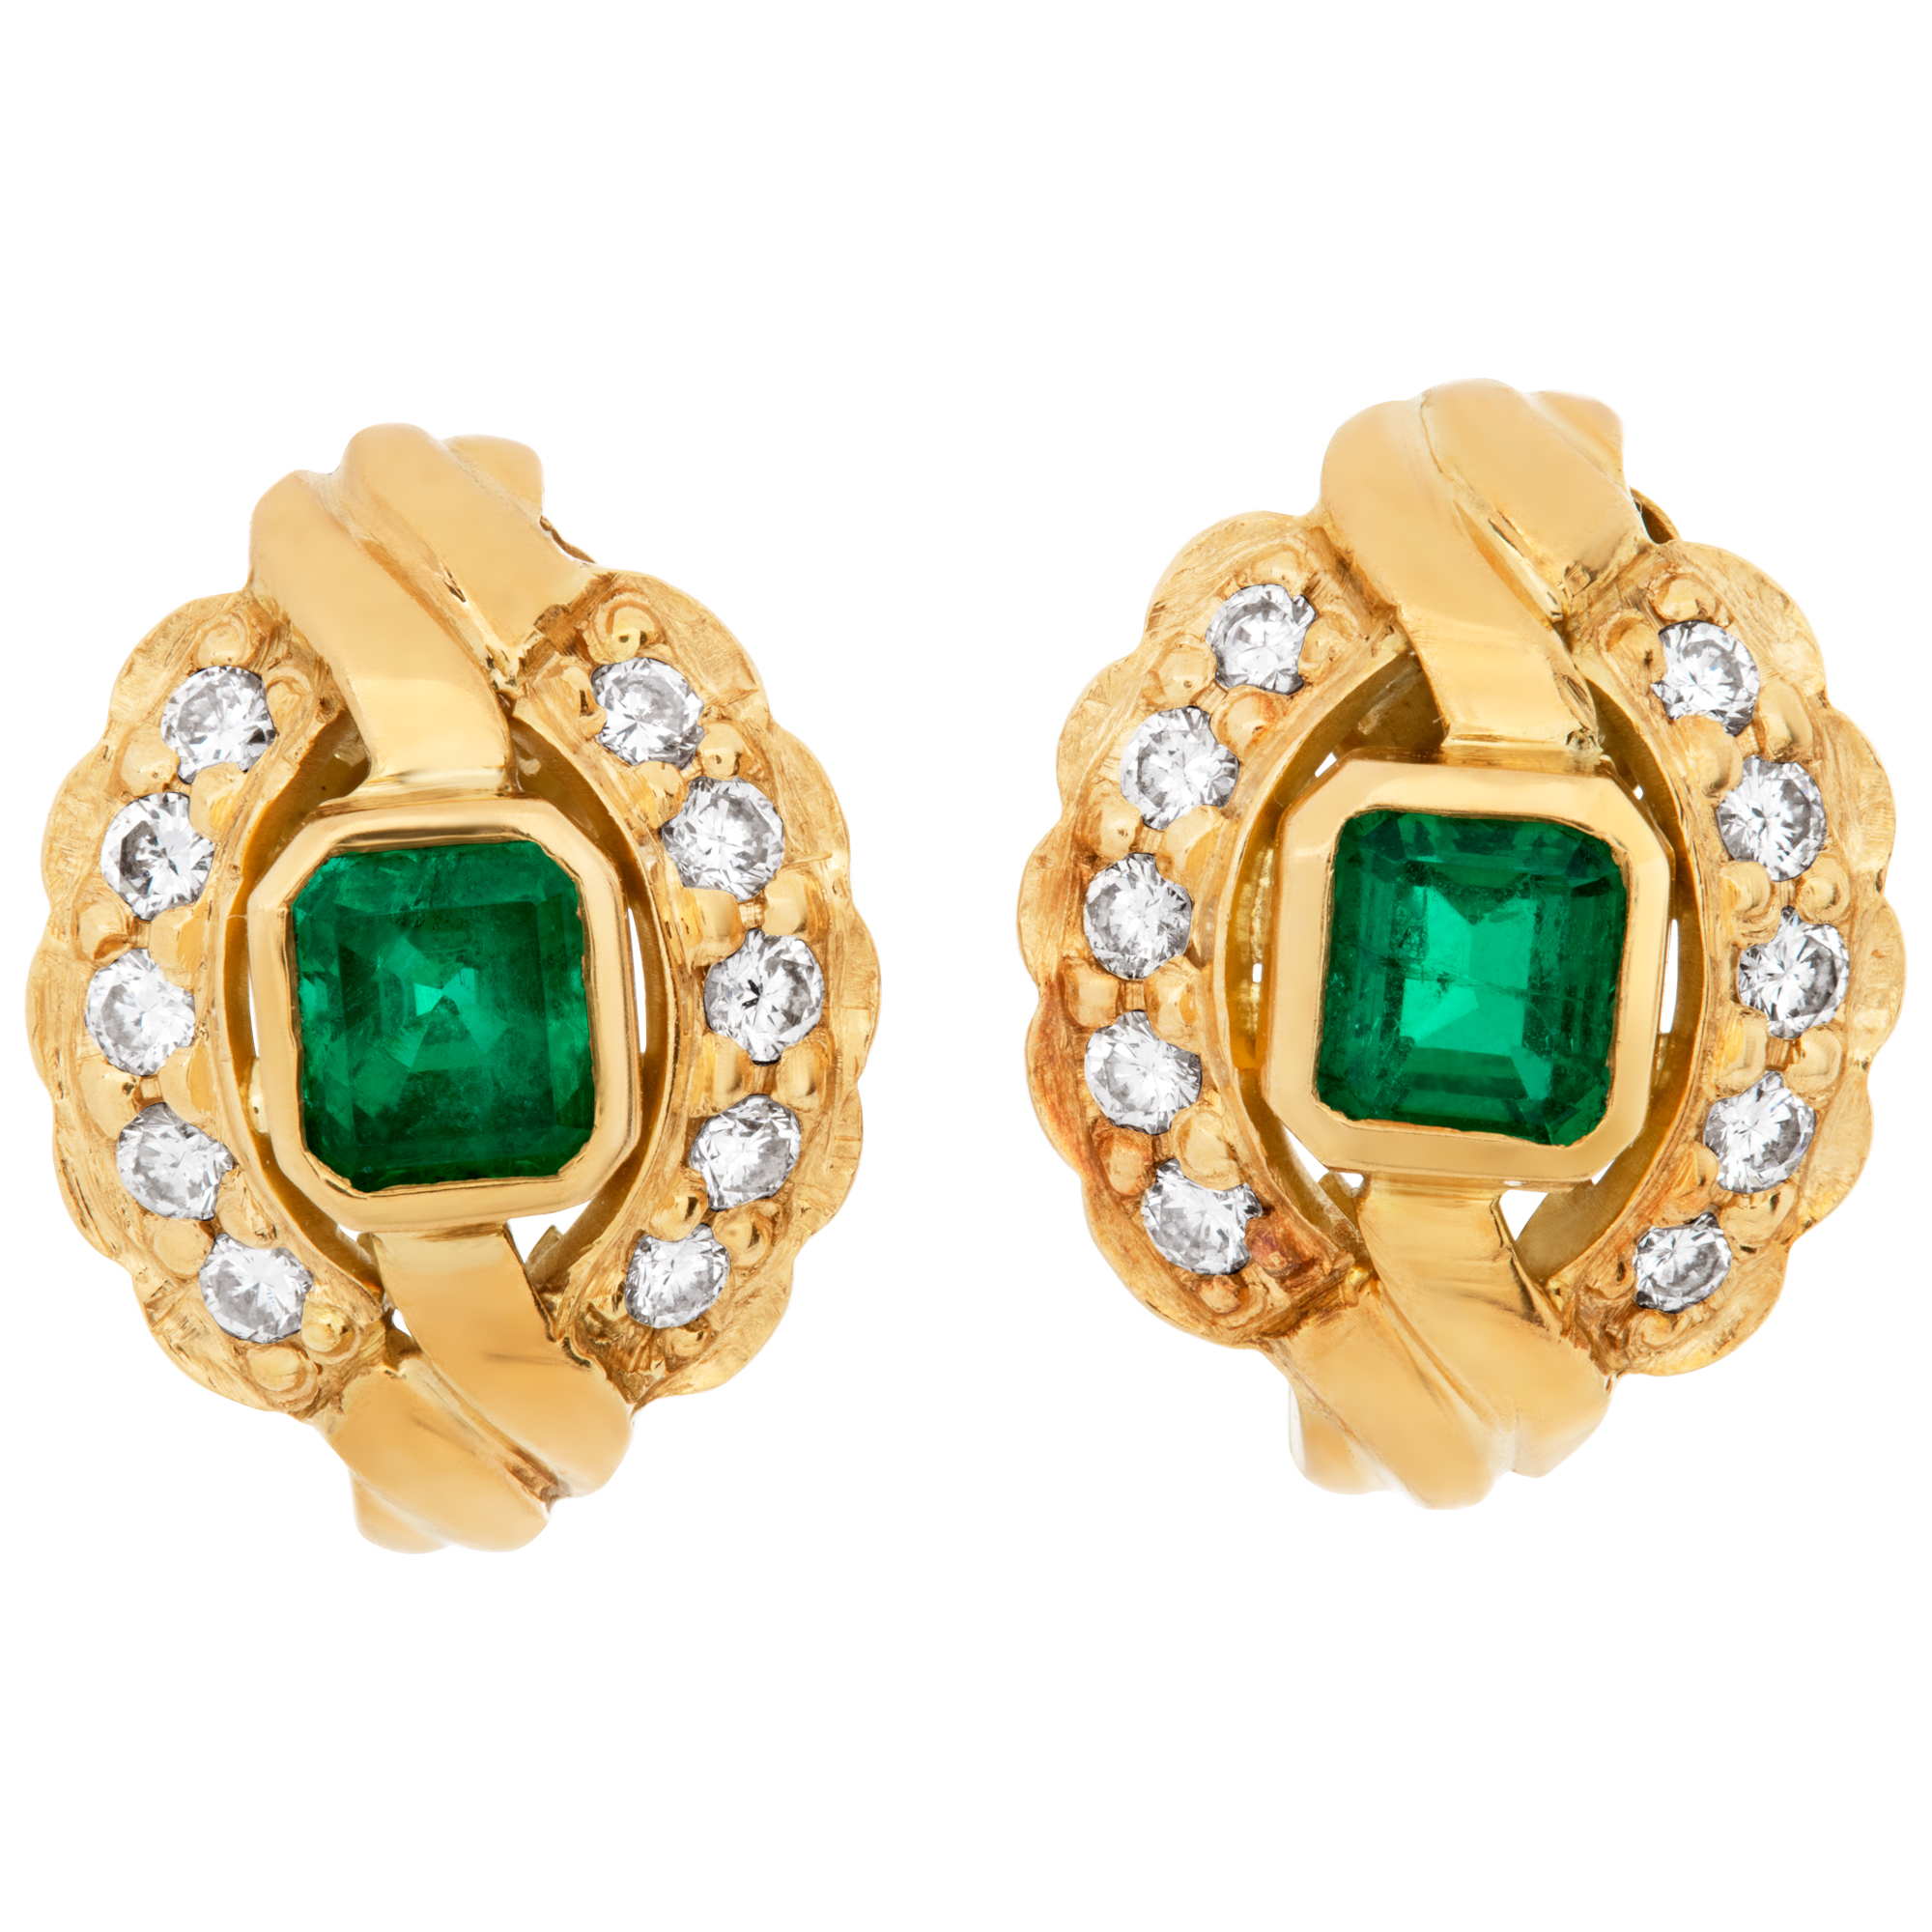 Emerald Earrings Set In 18k Yellow Gold With Diamond Accents image 1